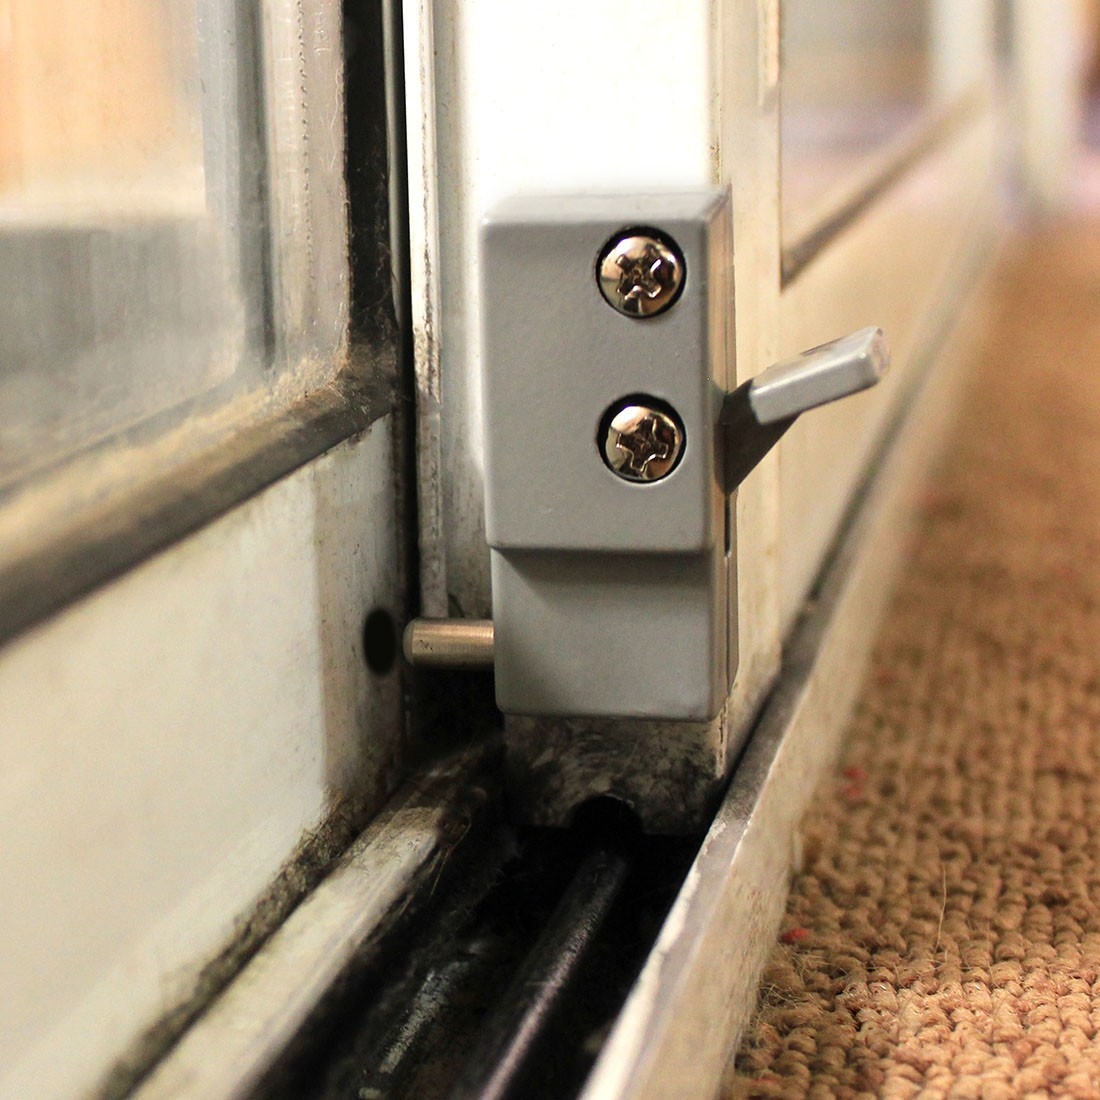 Auxiliary Security Locks For Sliding Glass Patio Doors